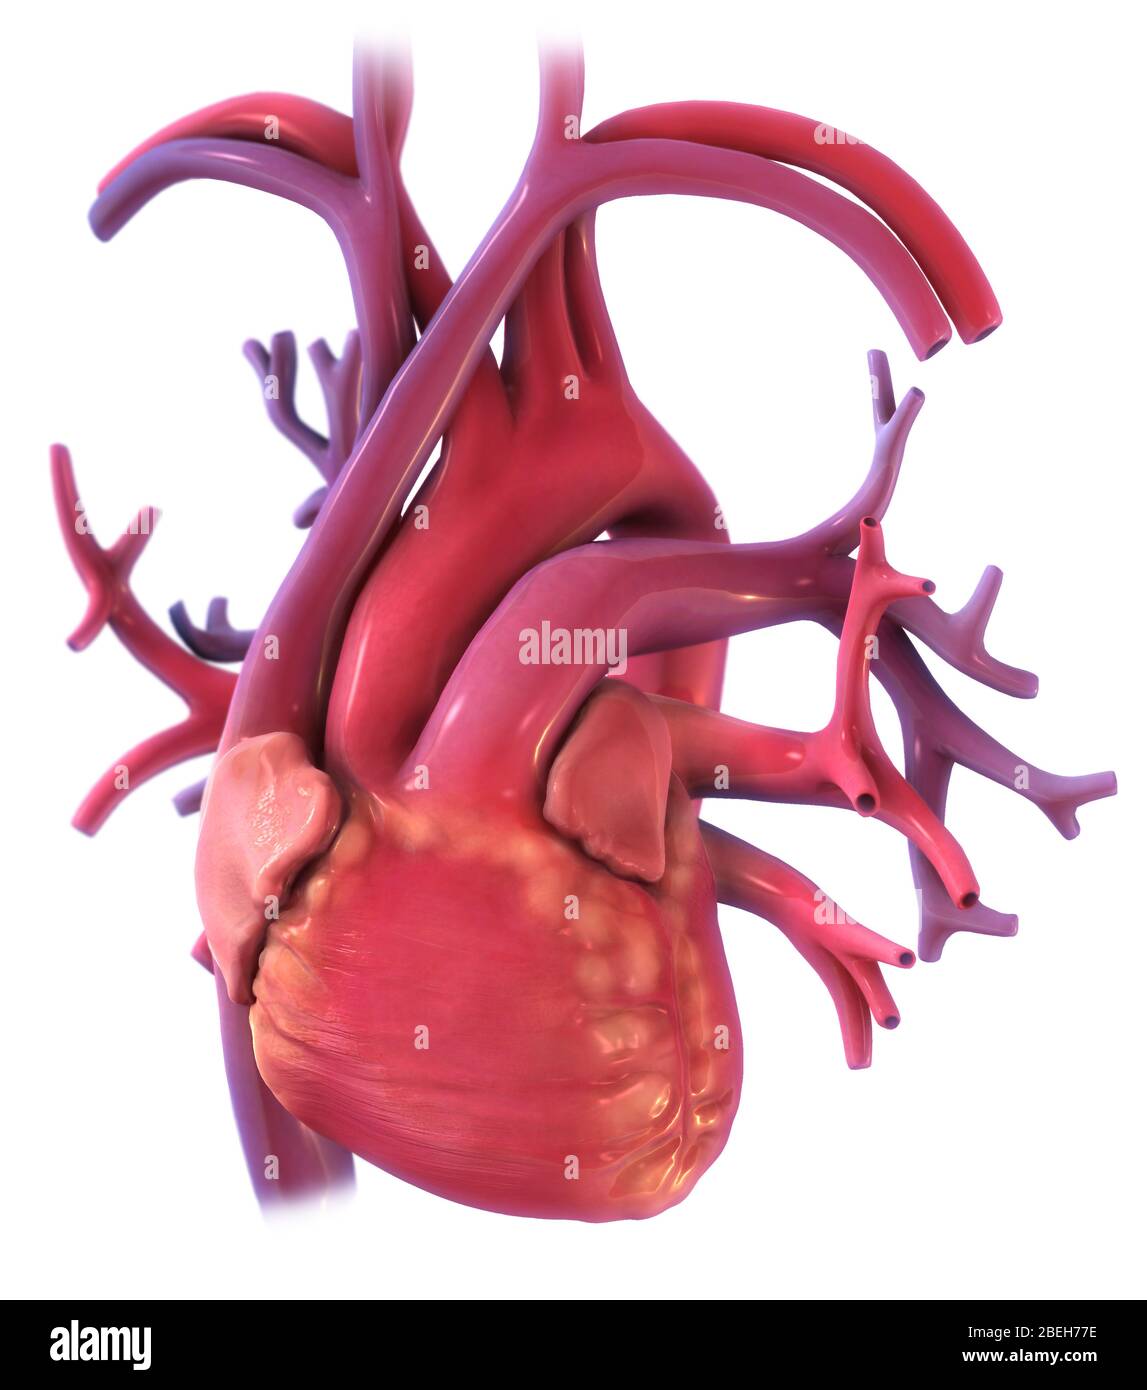 An illustration of the heart seen through the lungs from an anterior view. Stock Photo